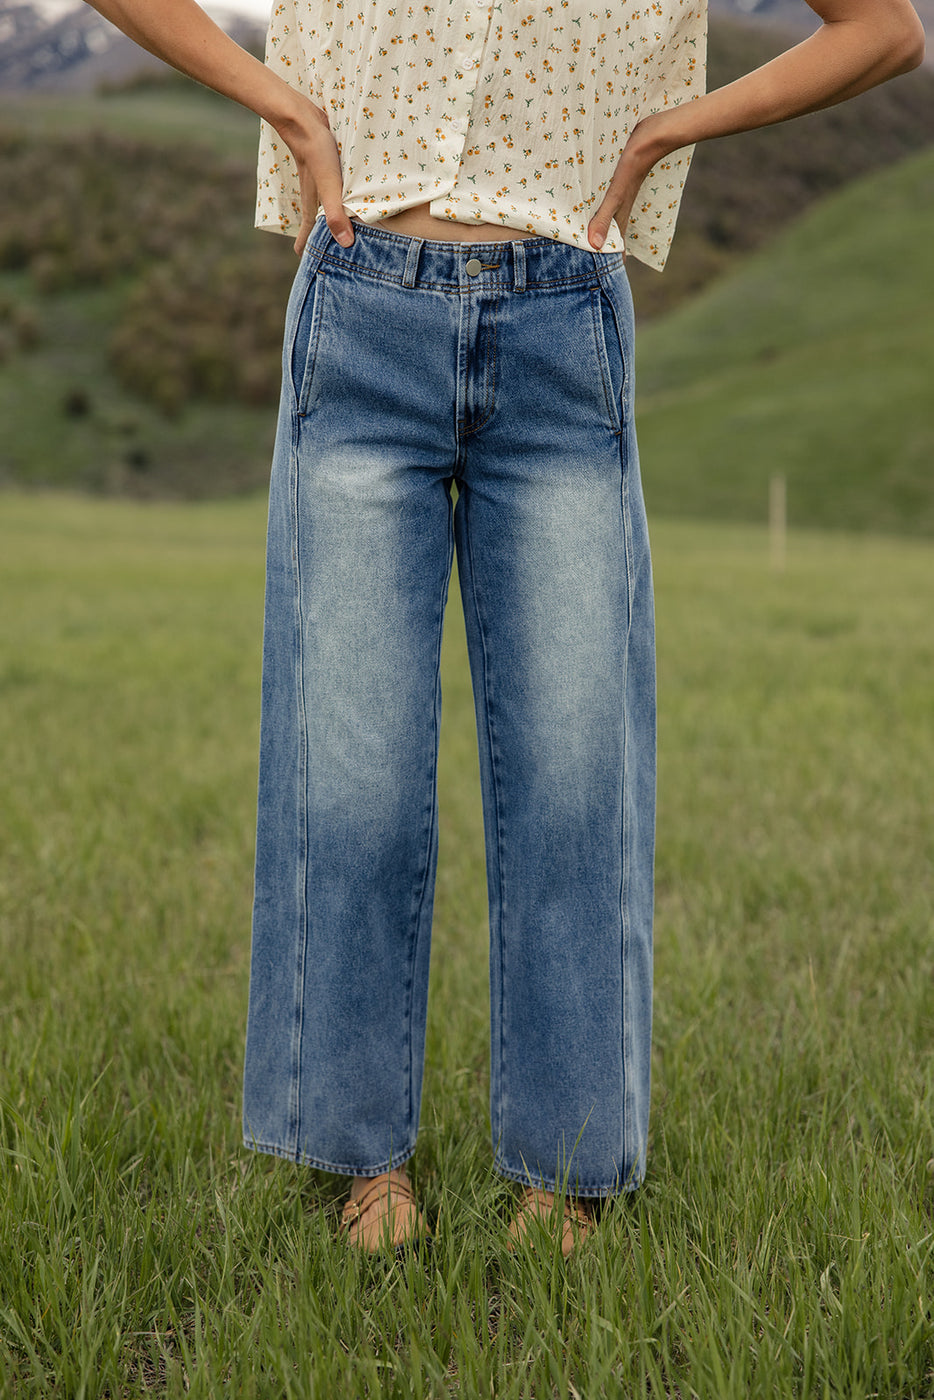 a person wearing jeans in a field